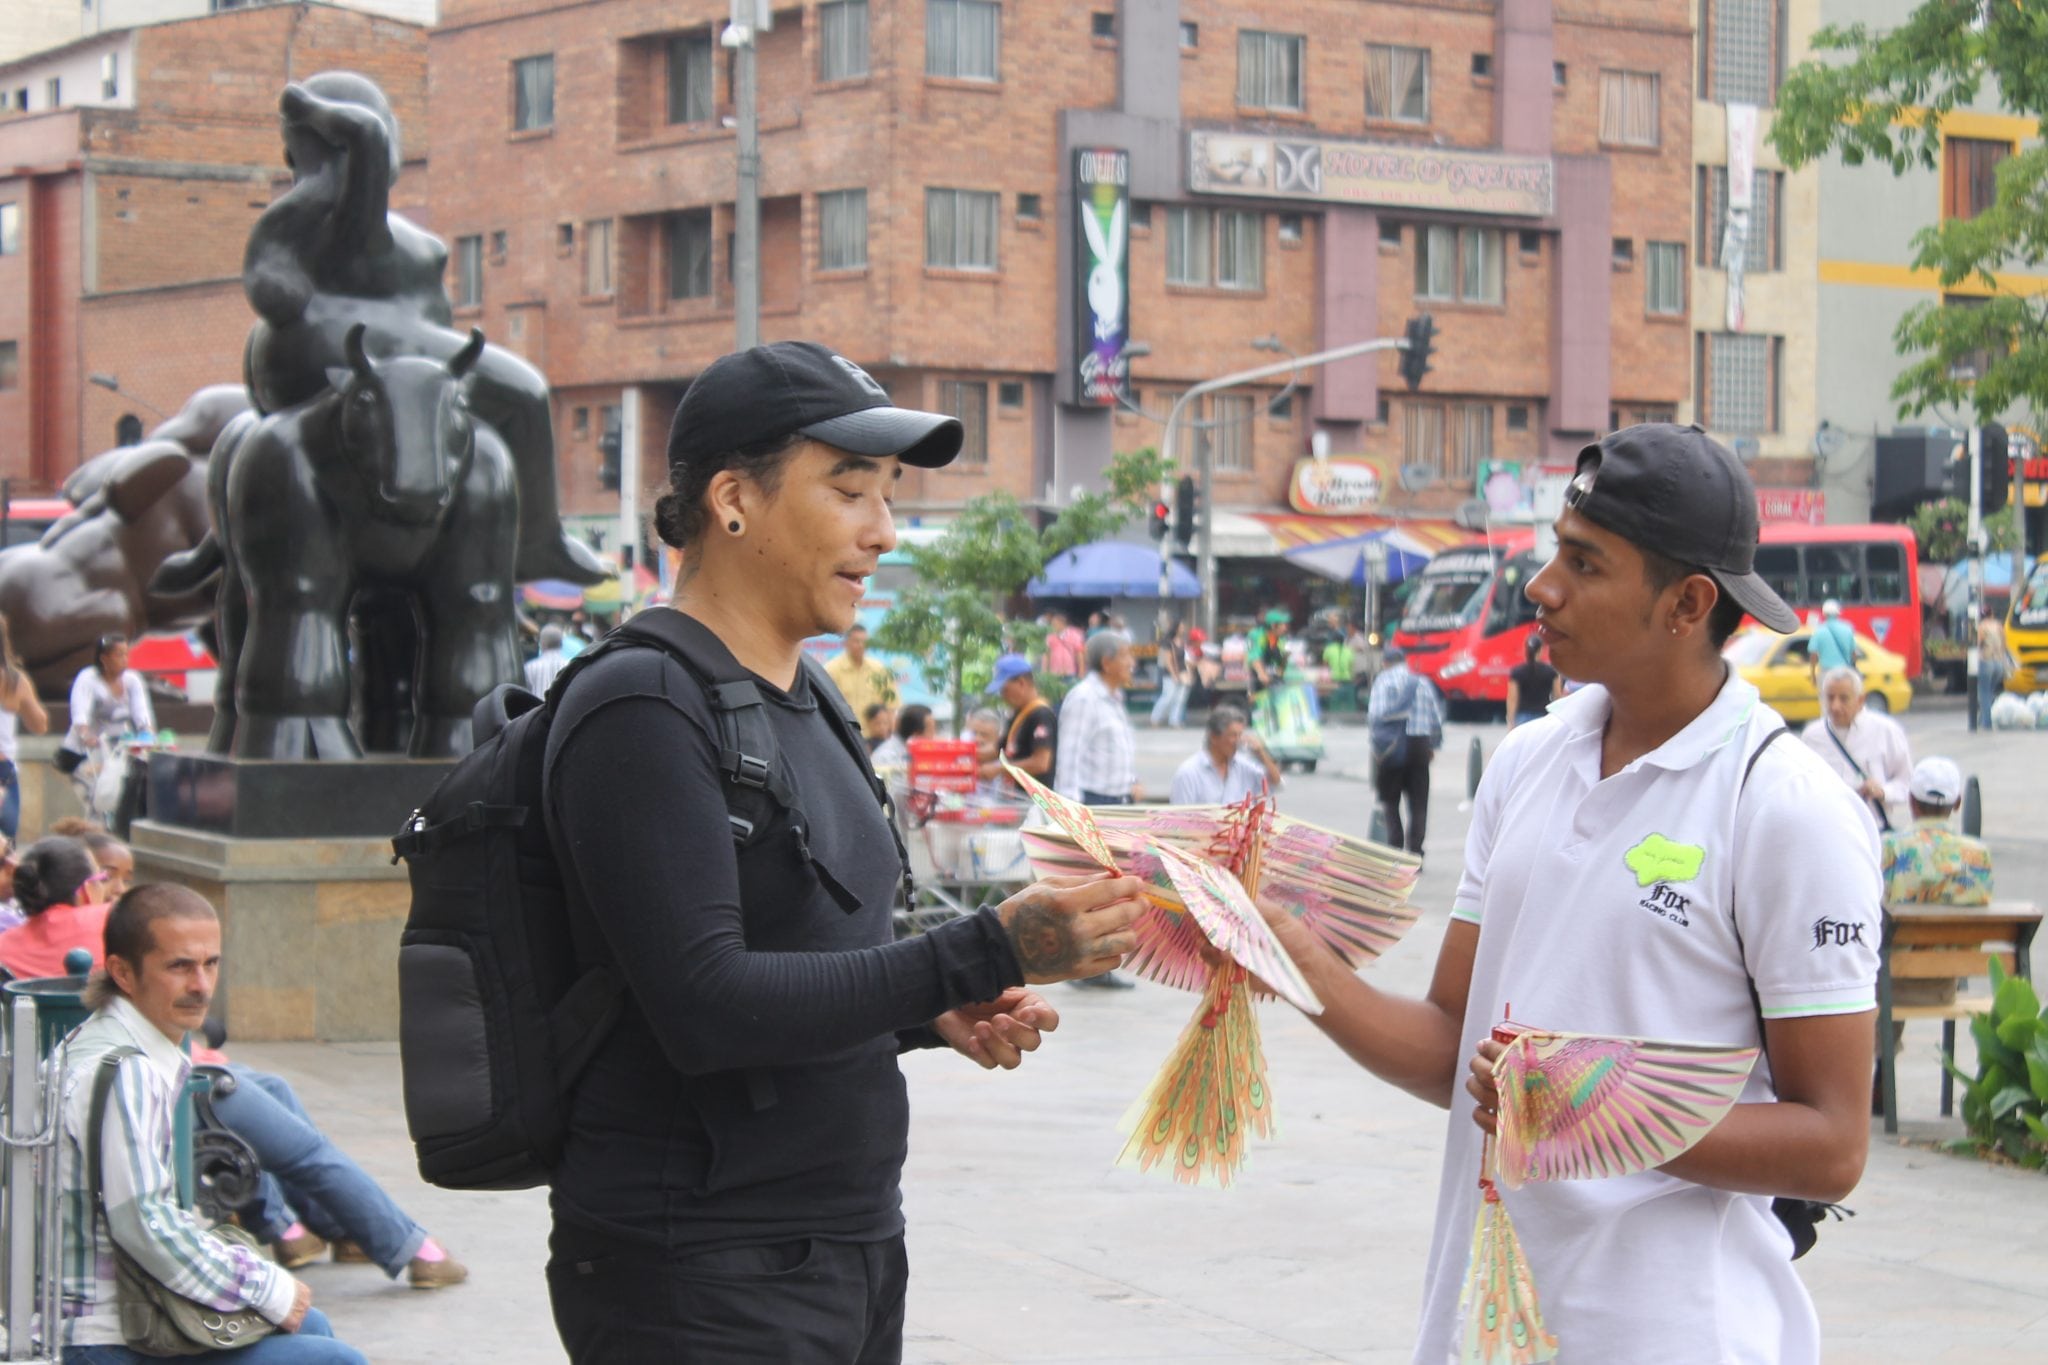 A tourist buying souvenirs in the city center of Medellin, Colombia.